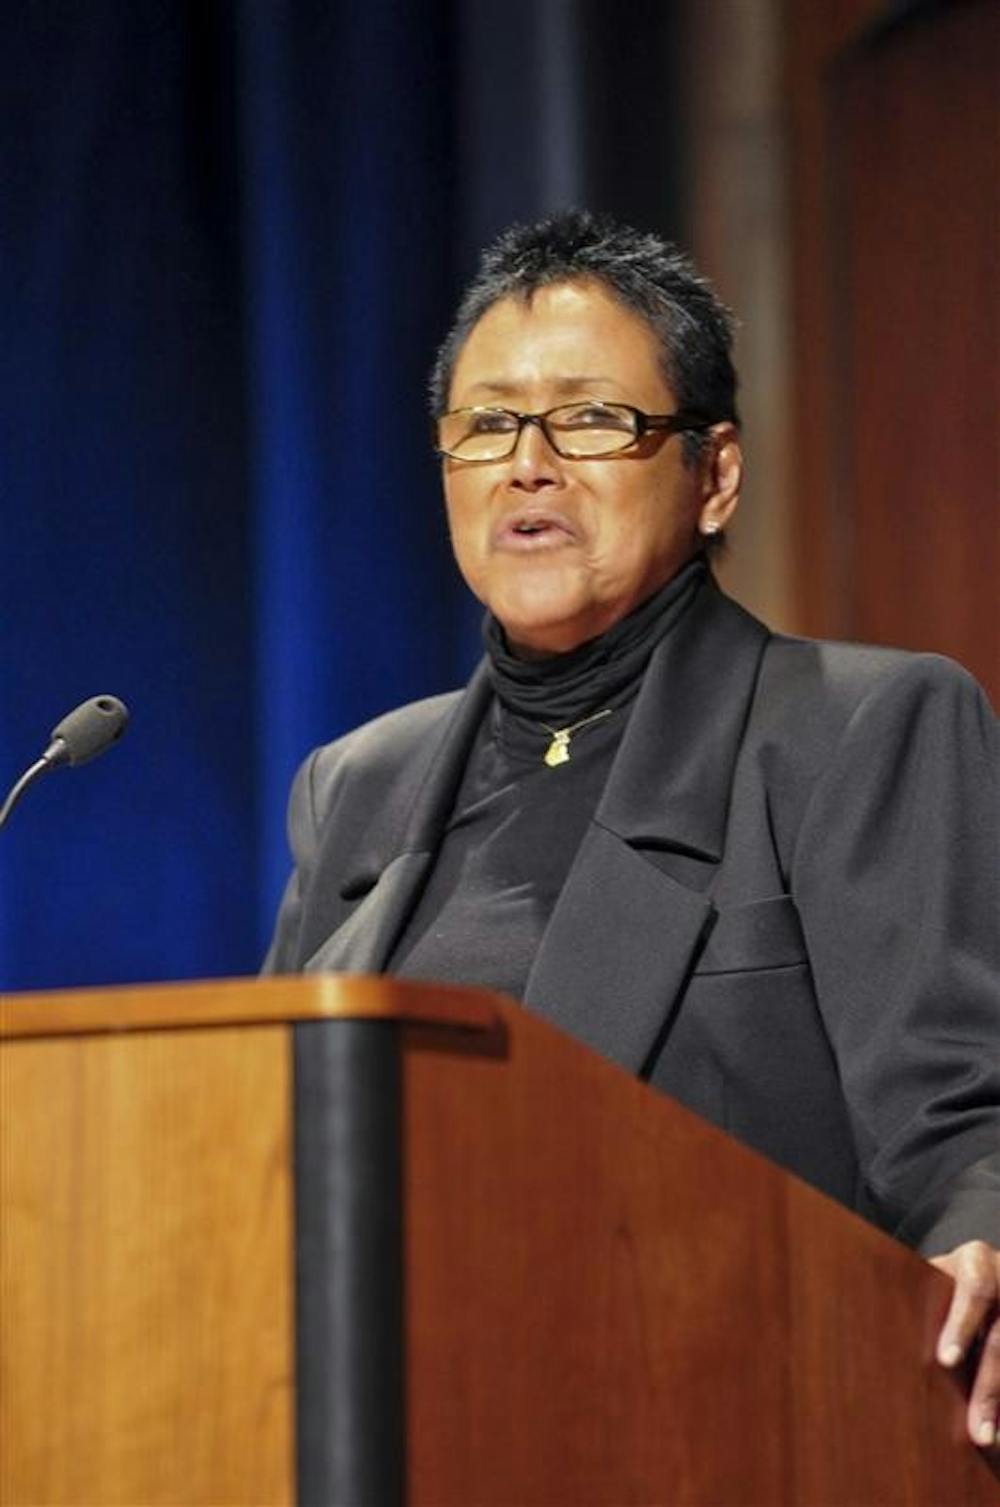 Elaine Brown speaks Sunday at the Whittenberger Auditorium as part of IU's Dr. Martin Luther King, Jr. Celebration activities. Brown, an activist, author, and singer, was the first and only woman to lead the Black Panther Party.